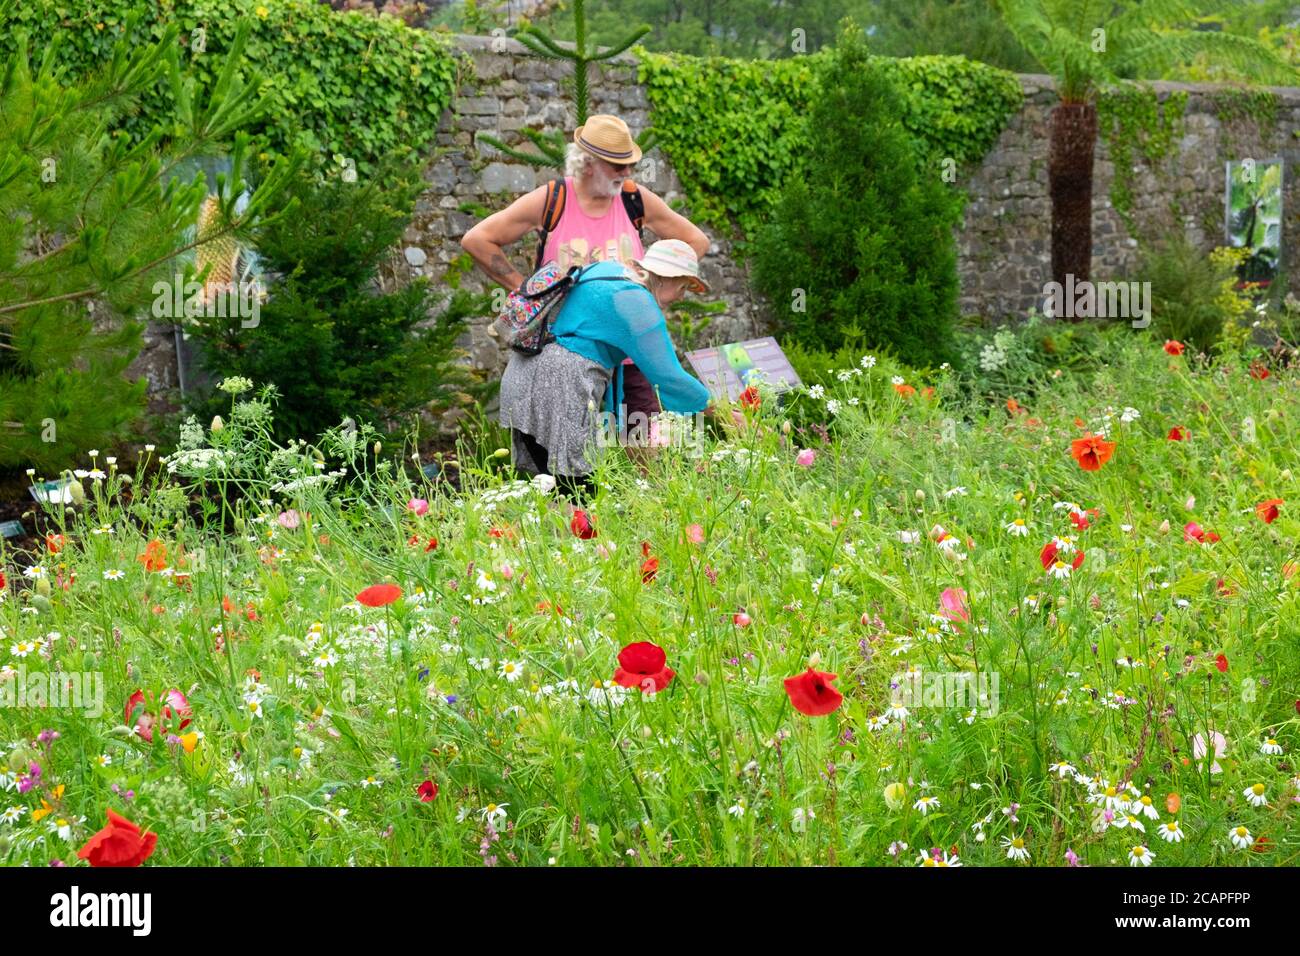 People wearing straw hats at the National Botanic Garden of Wales admire the poppy meadow in summer August 2020 Carmarthenshire Wales UK KATHY DEWITT Stock Photo